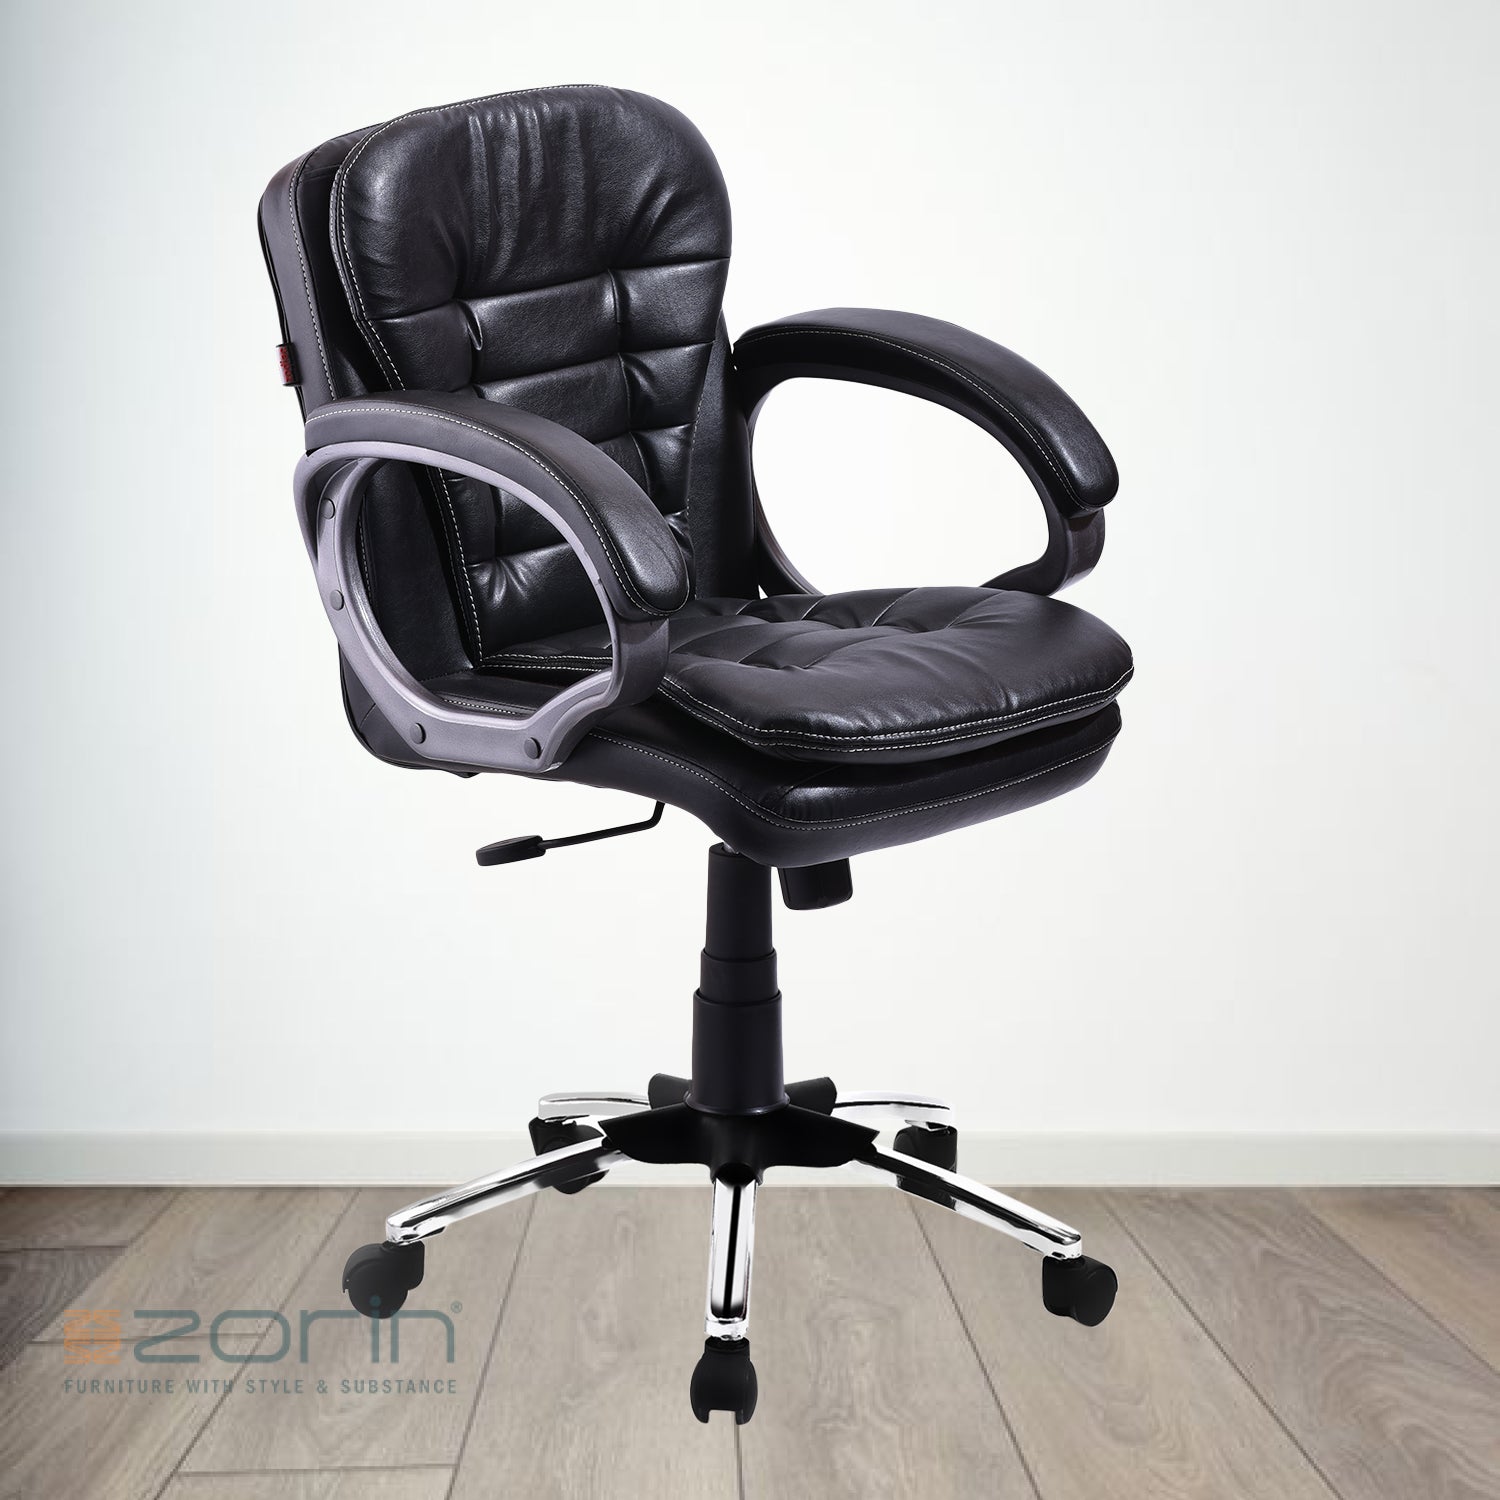 ZSE1030 Medium Back Chair by Zorin in Black Color Zorin